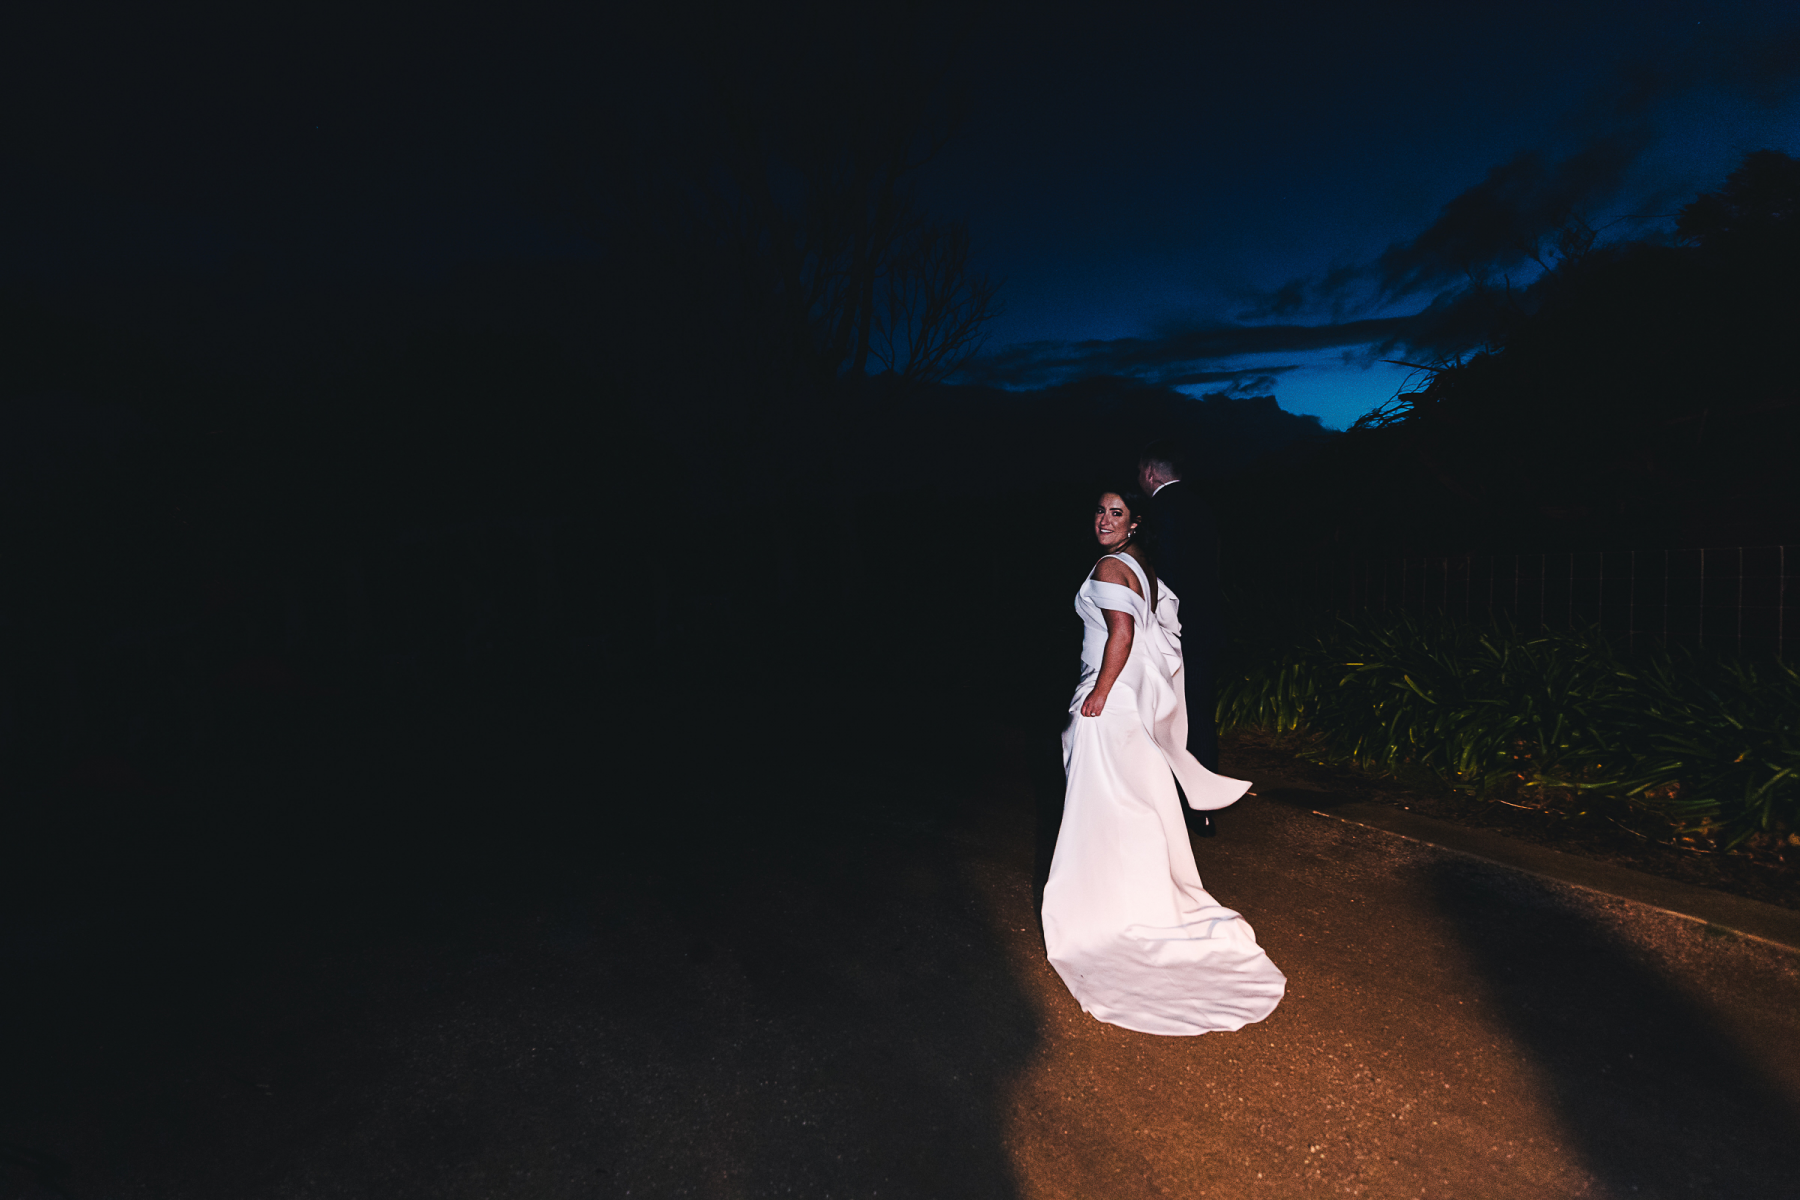 Wedding Photography Melbourne, Victoria  by Wild Romantic Photography Melbourne